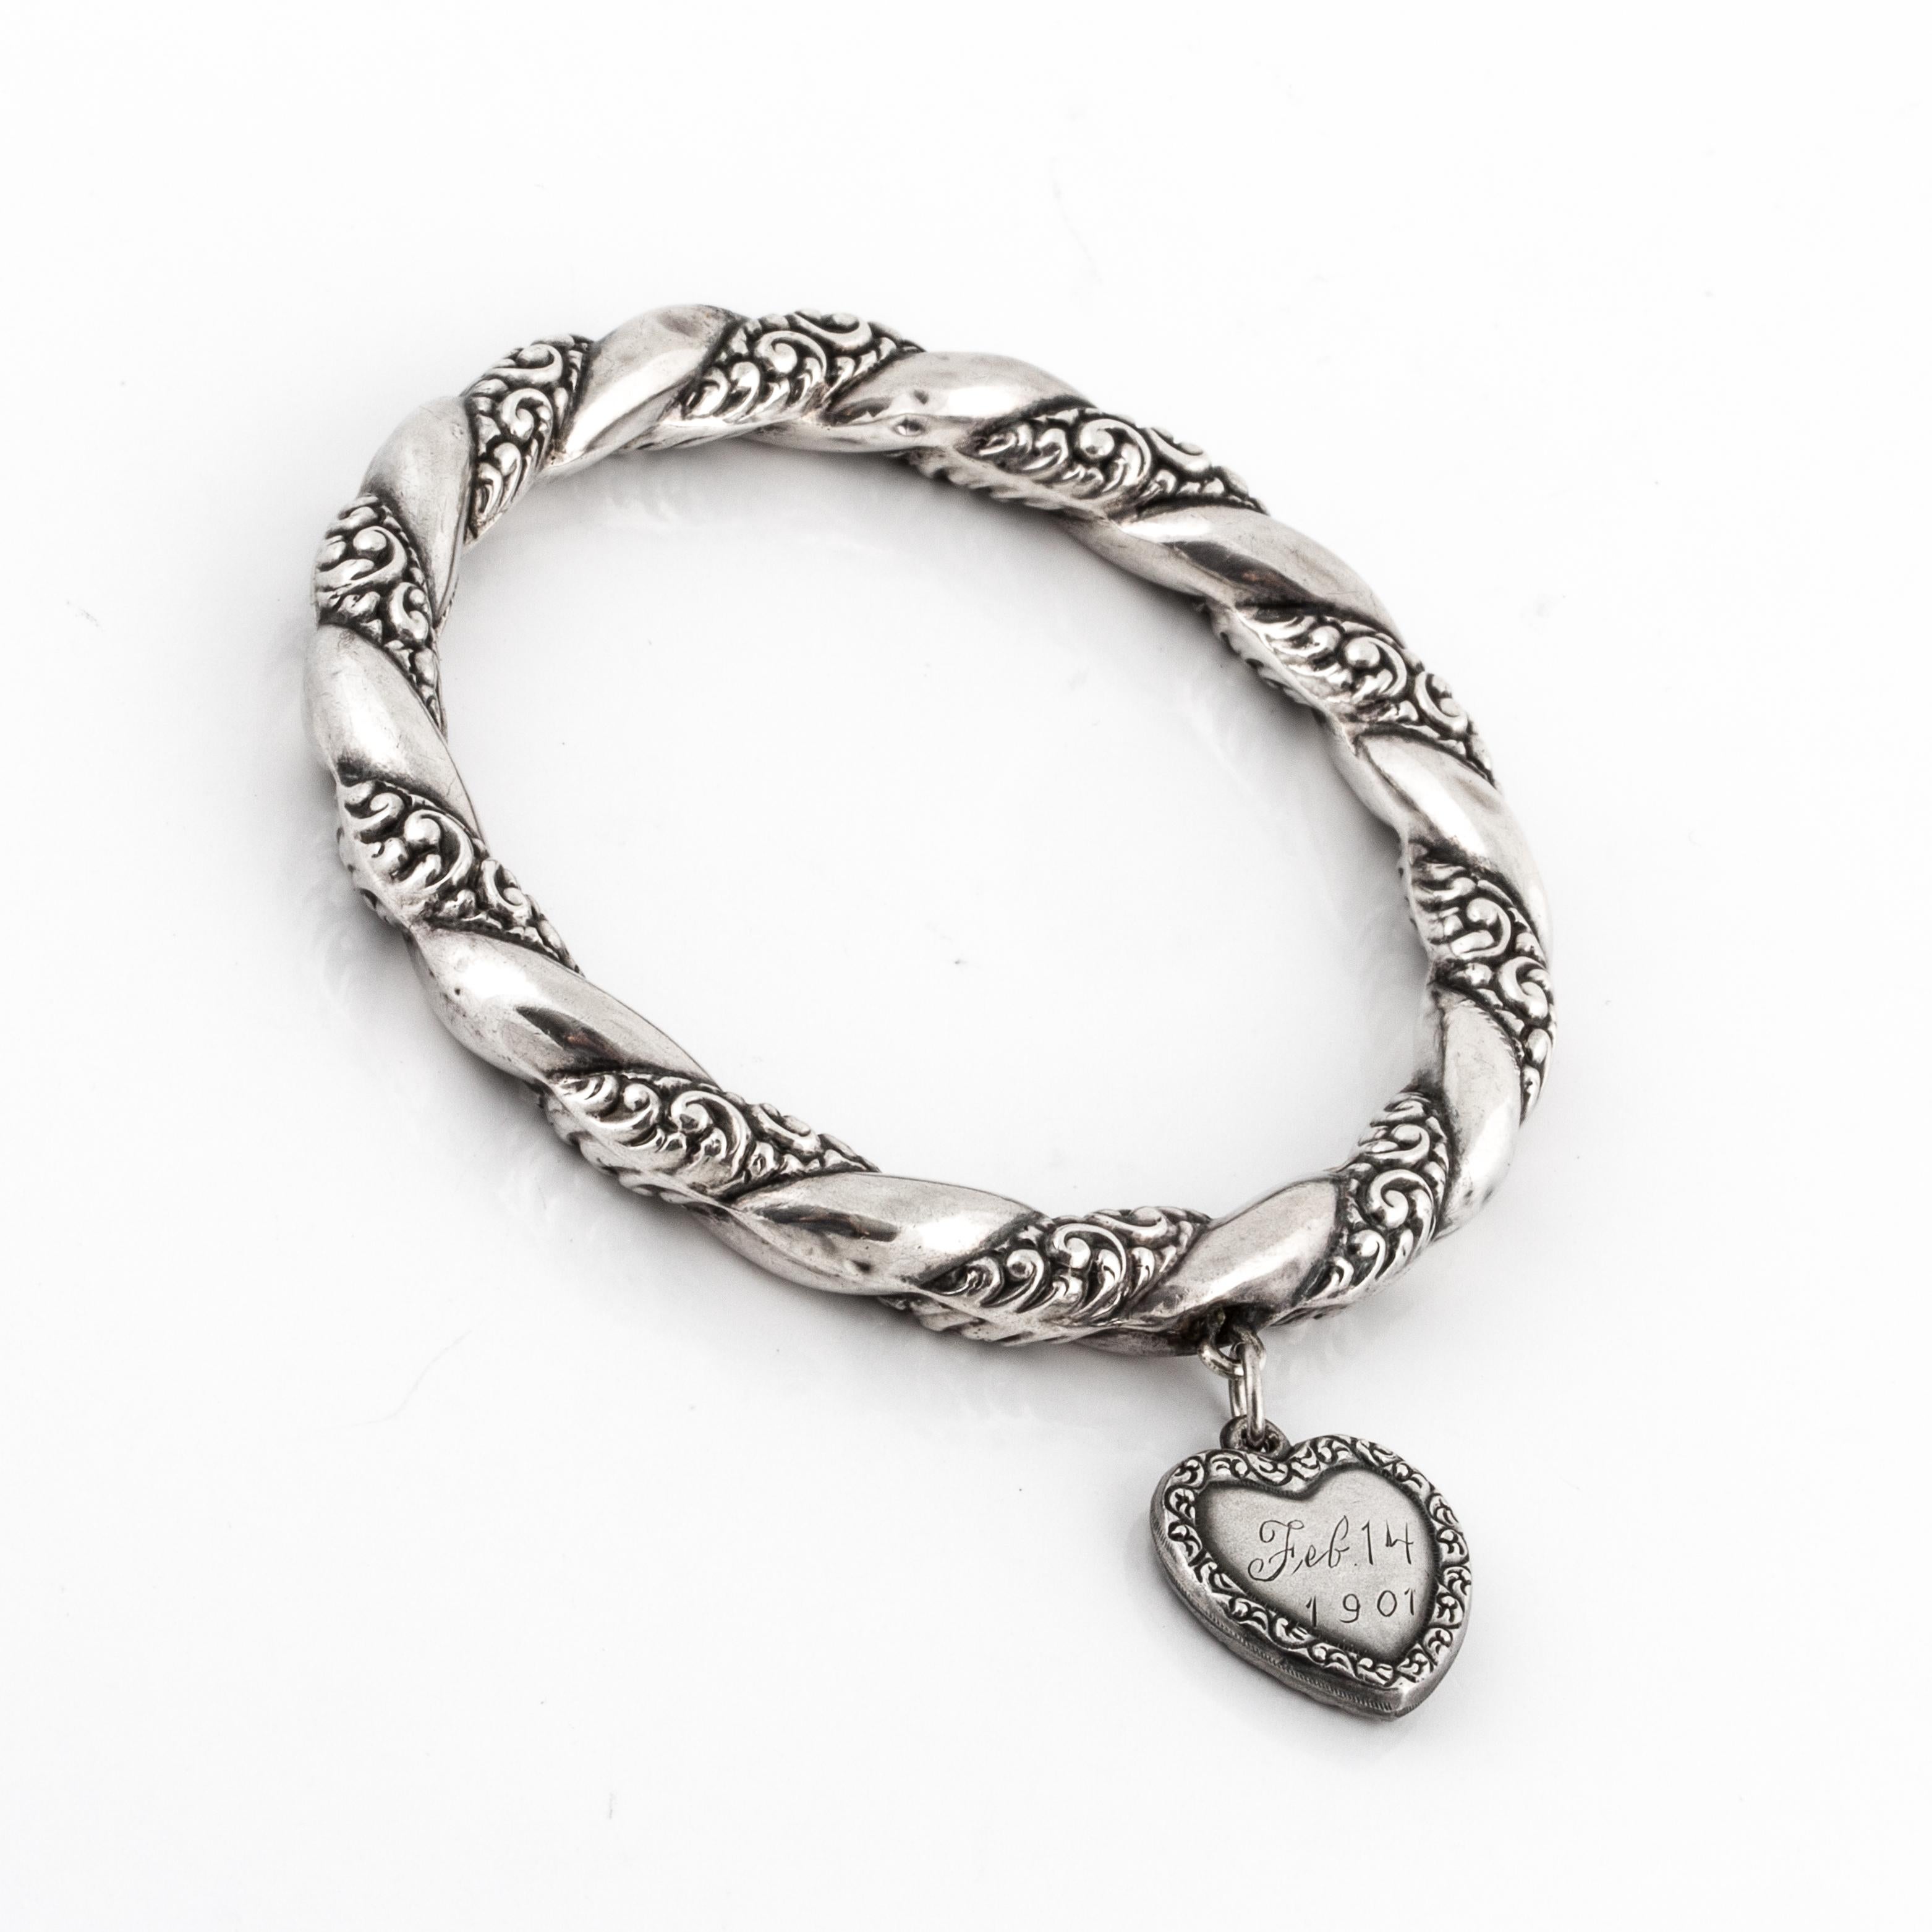 Edwardian sterling silver repoussé bangle bracelet with a heart charm.  The heart is inscribed 